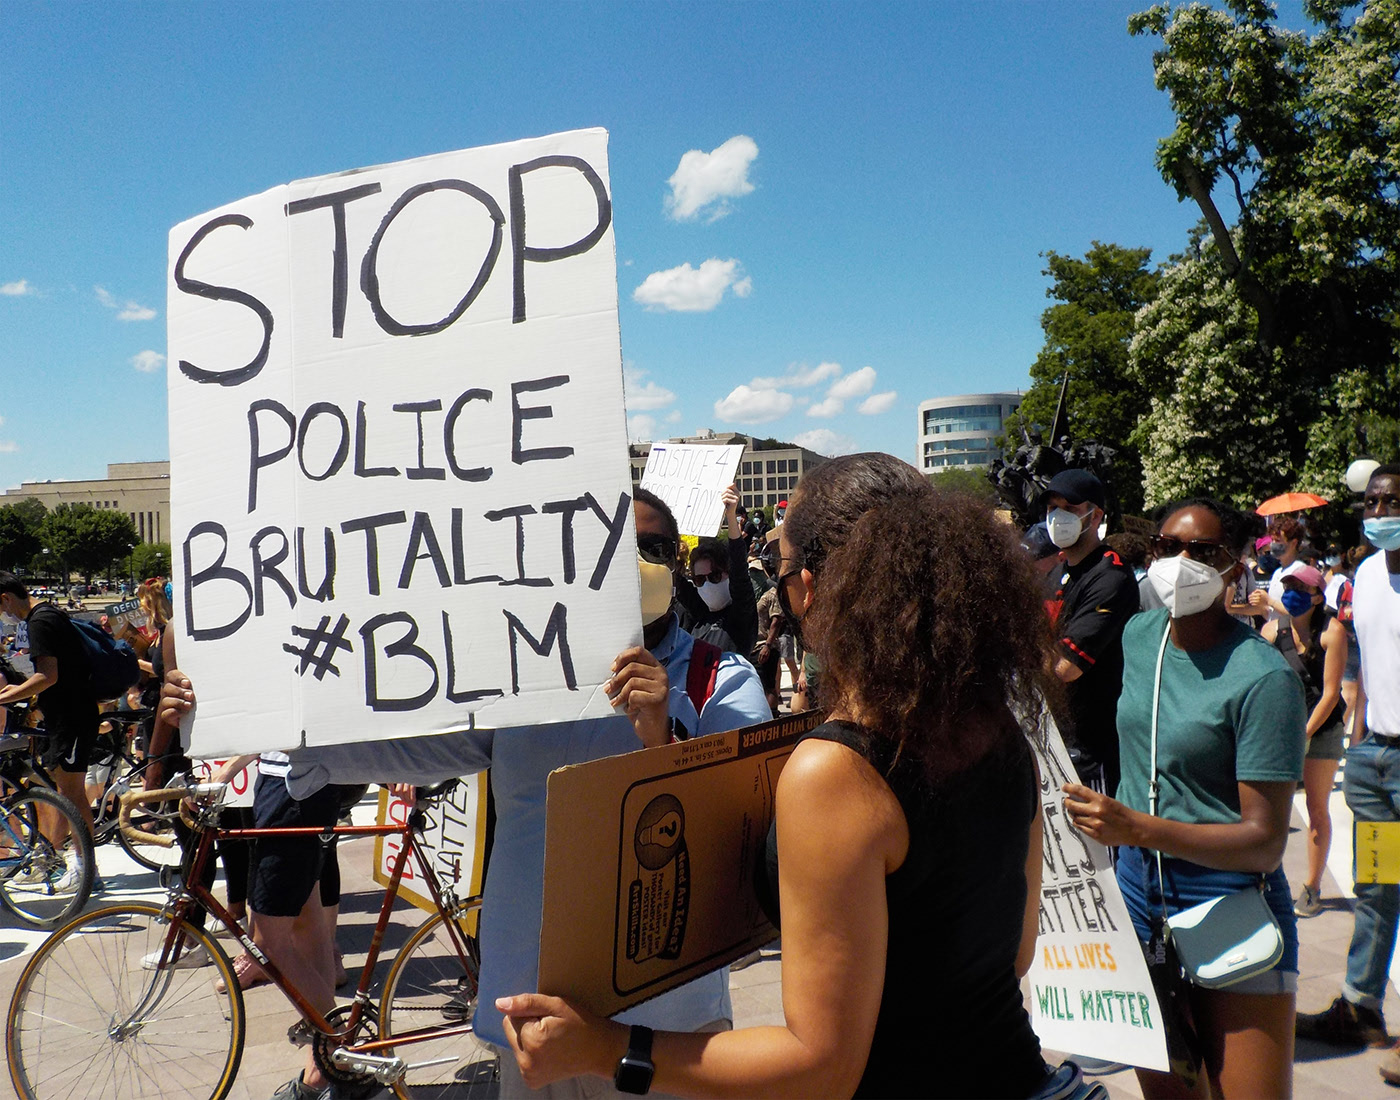 Protester holding a sign reading "Stop Police Brutality #BLM"